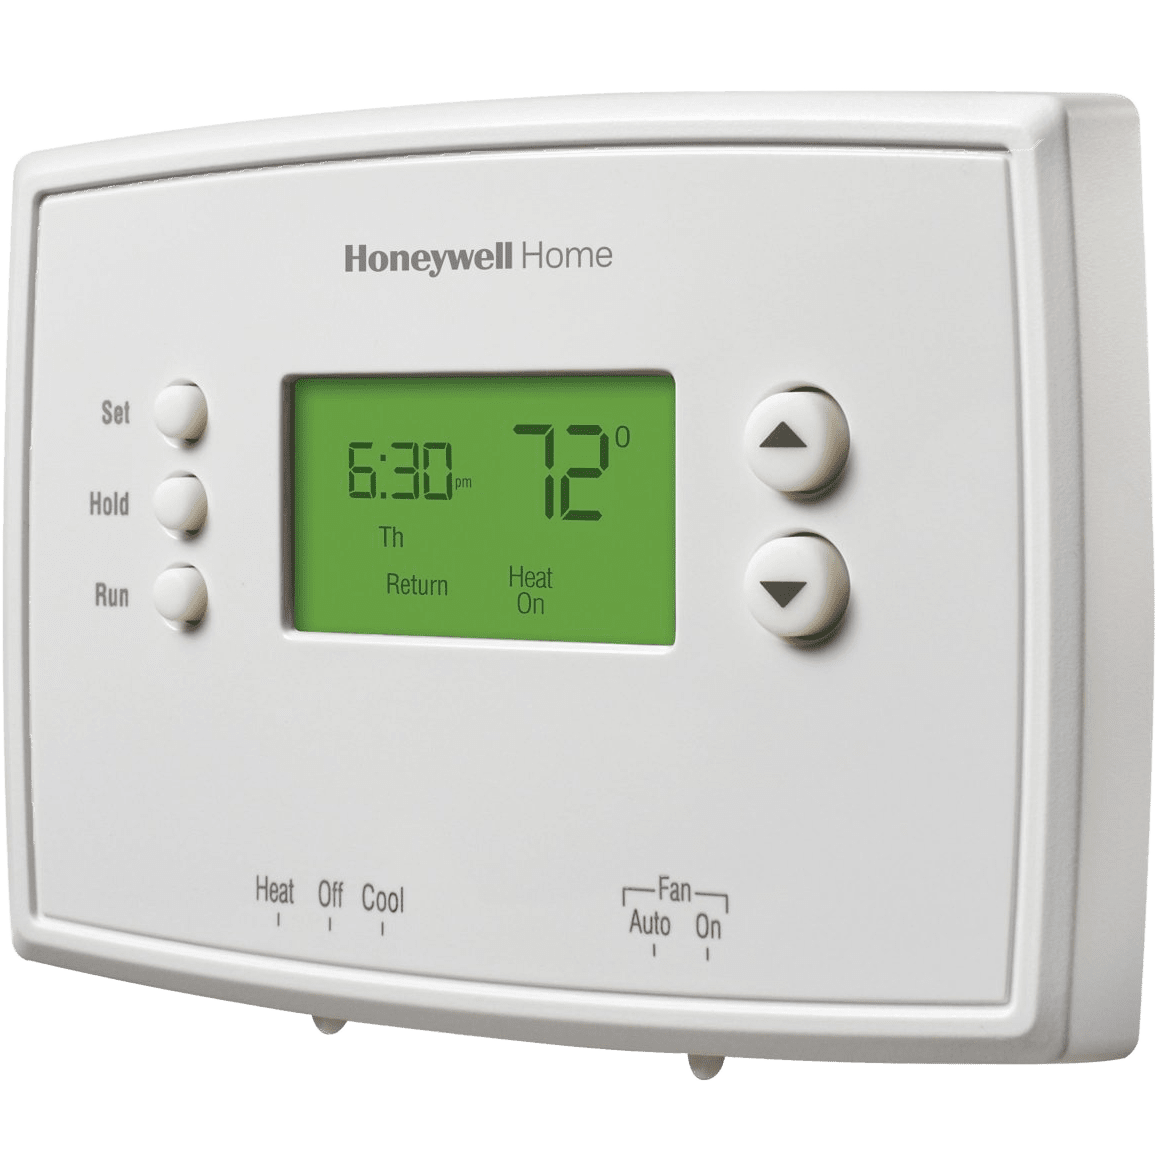 Lot of 5 Honeywell RTH2300B Digital Programmable Thermostat Heating & Cooling 